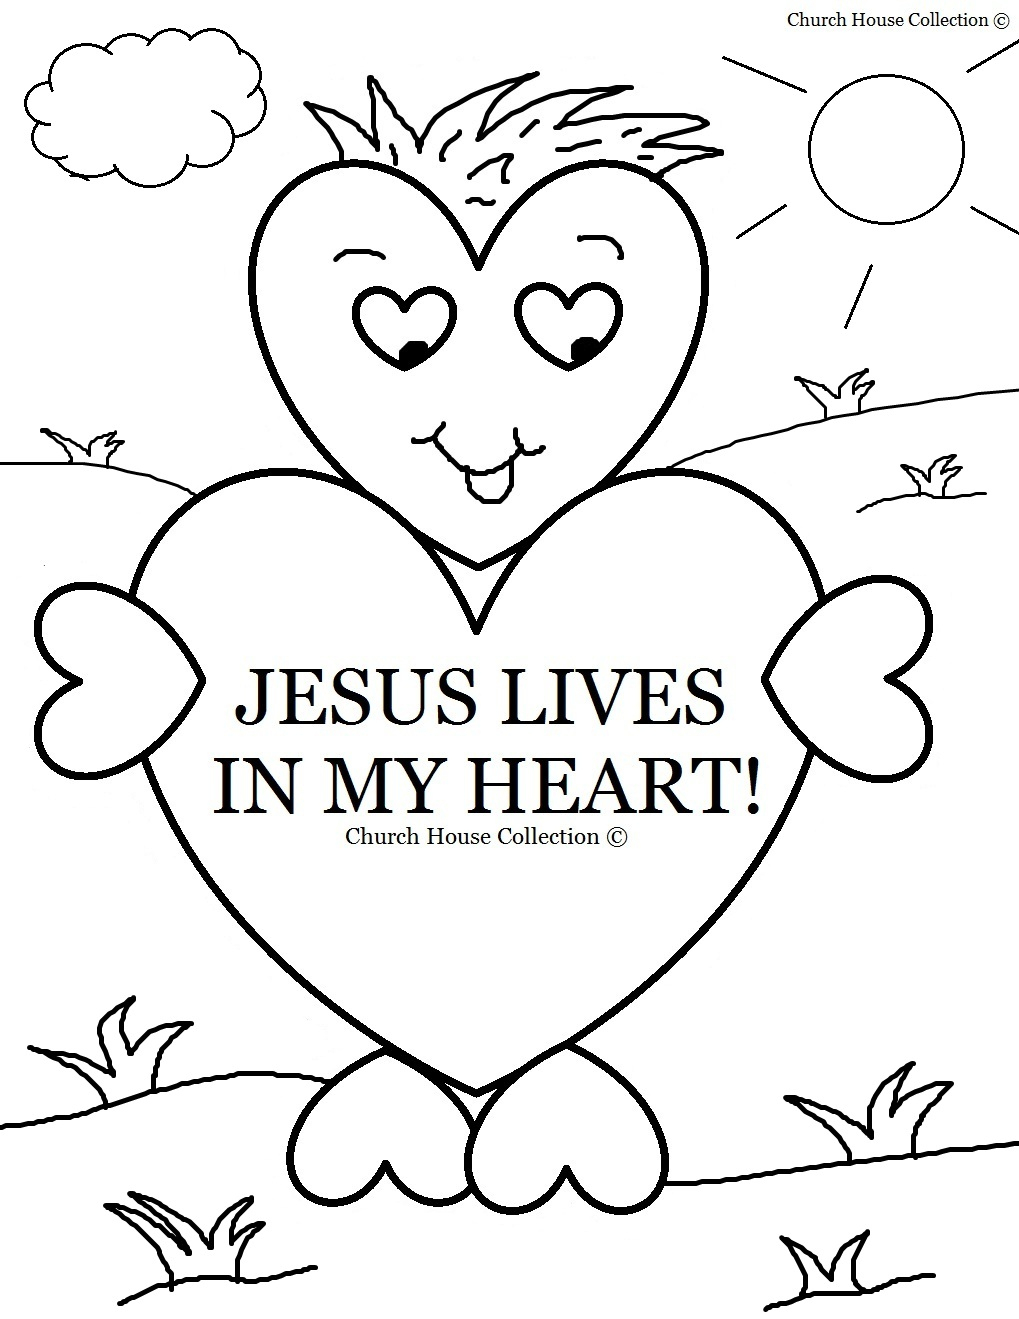 Coloring Pages : Coloring Pages Free For Sunday School Preschool - Free Printable Sunday School Coloring Sheets